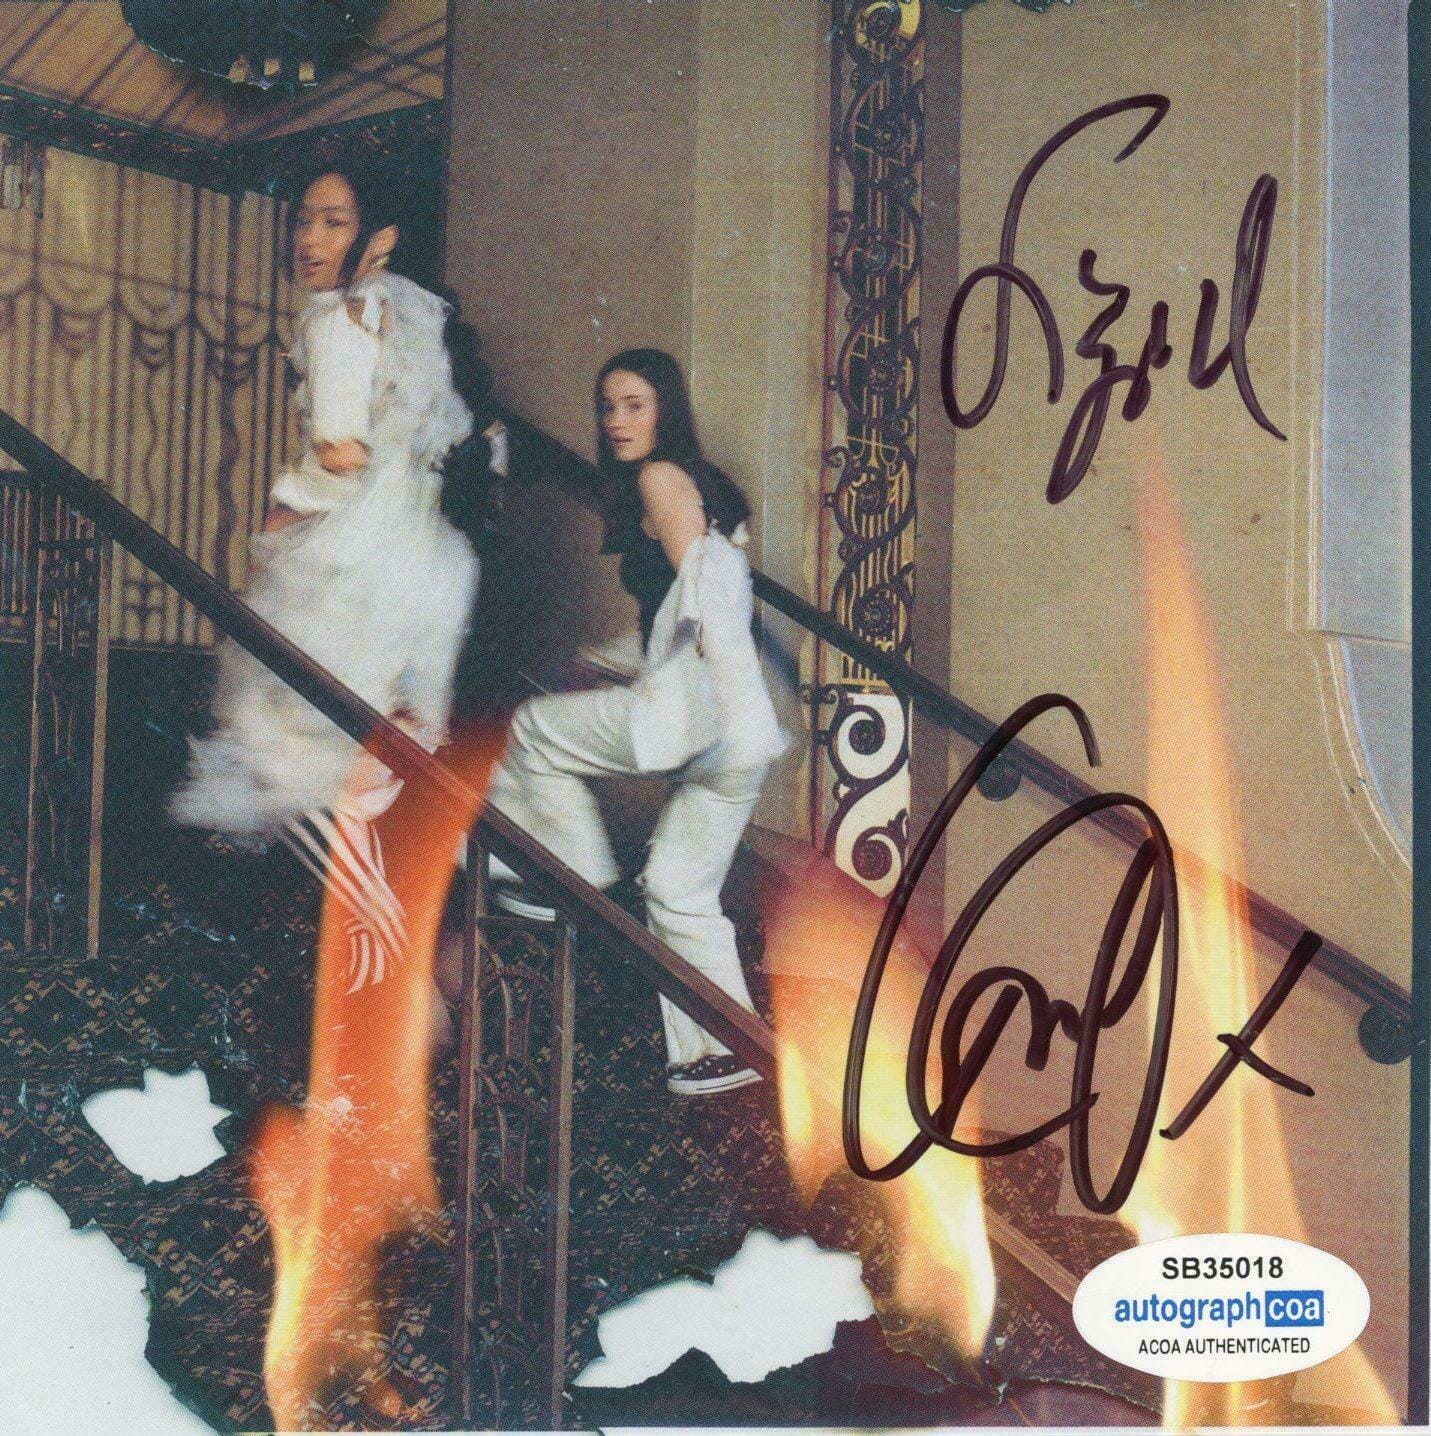 GRIFF X SIGRID “HEAD ON FIRE” AUTOGRAPHS SIGNED 2 TRACK CD SINGLE B ACOA
 COLLECTIBLE MEMORABILIA